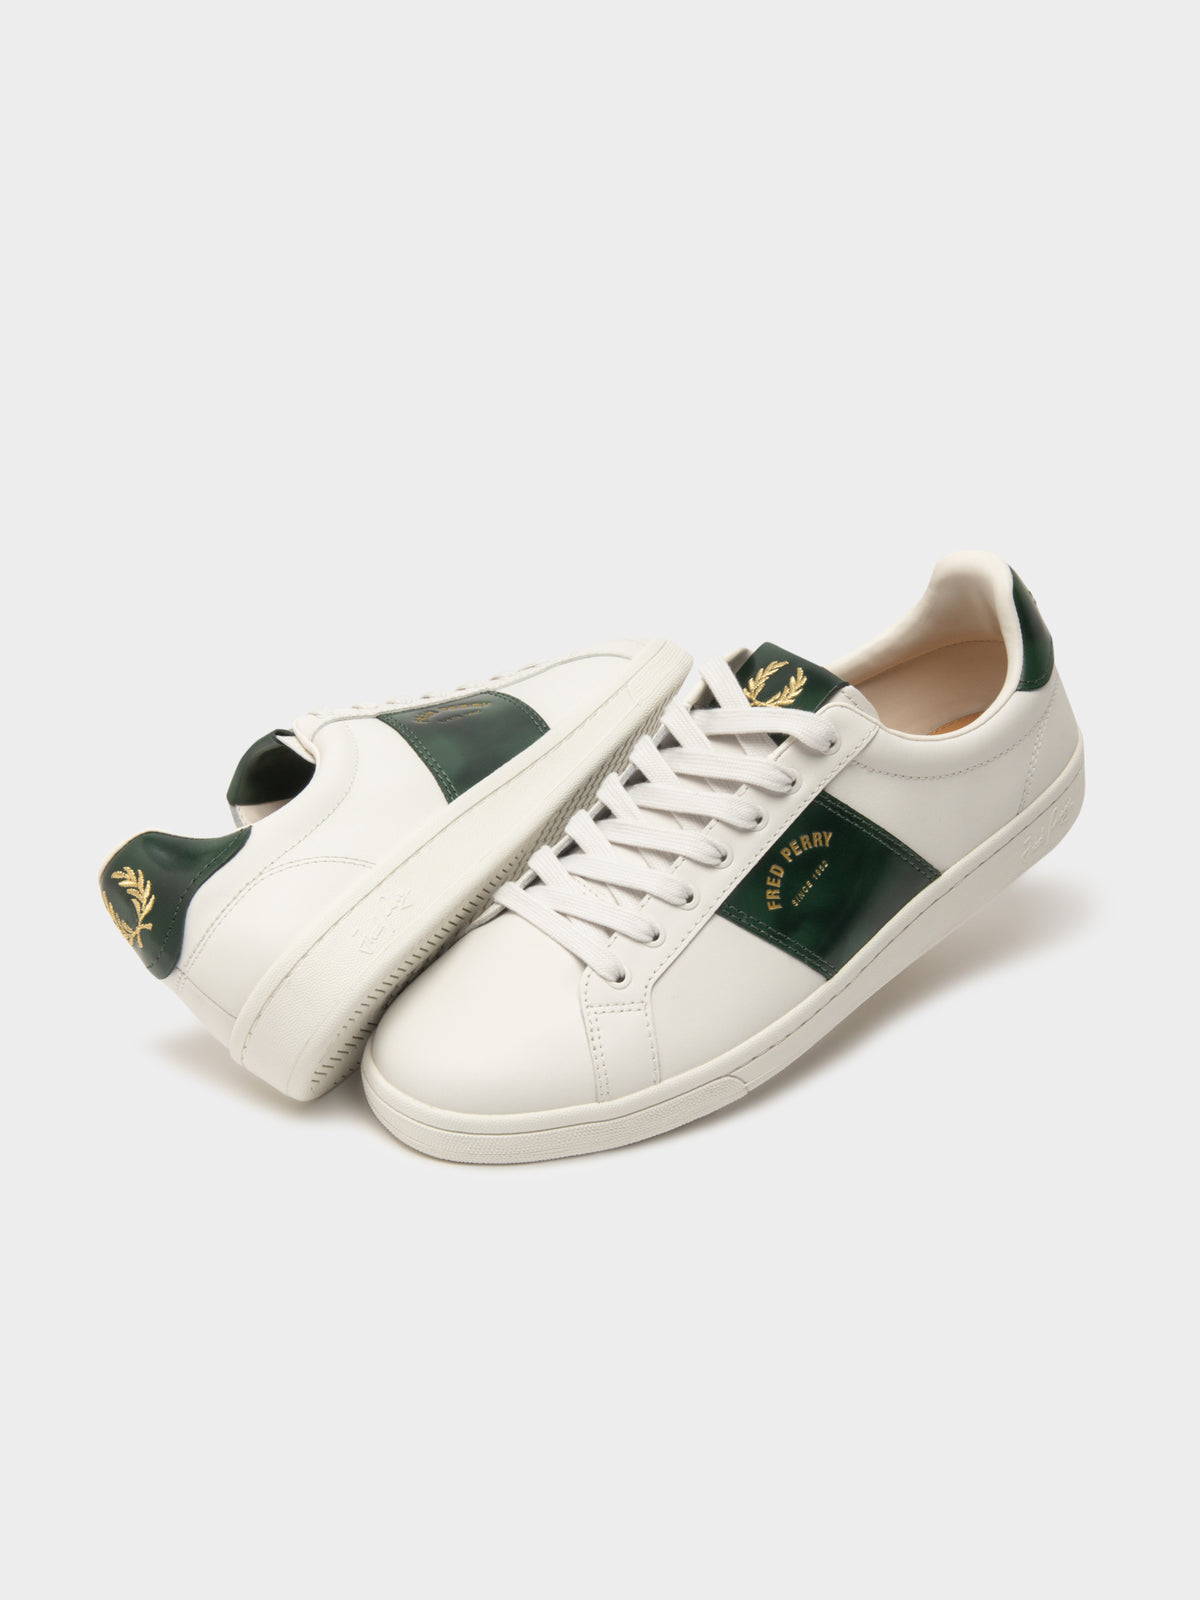 Mens B721 Leather Sneakers in Off-White &amp; Green